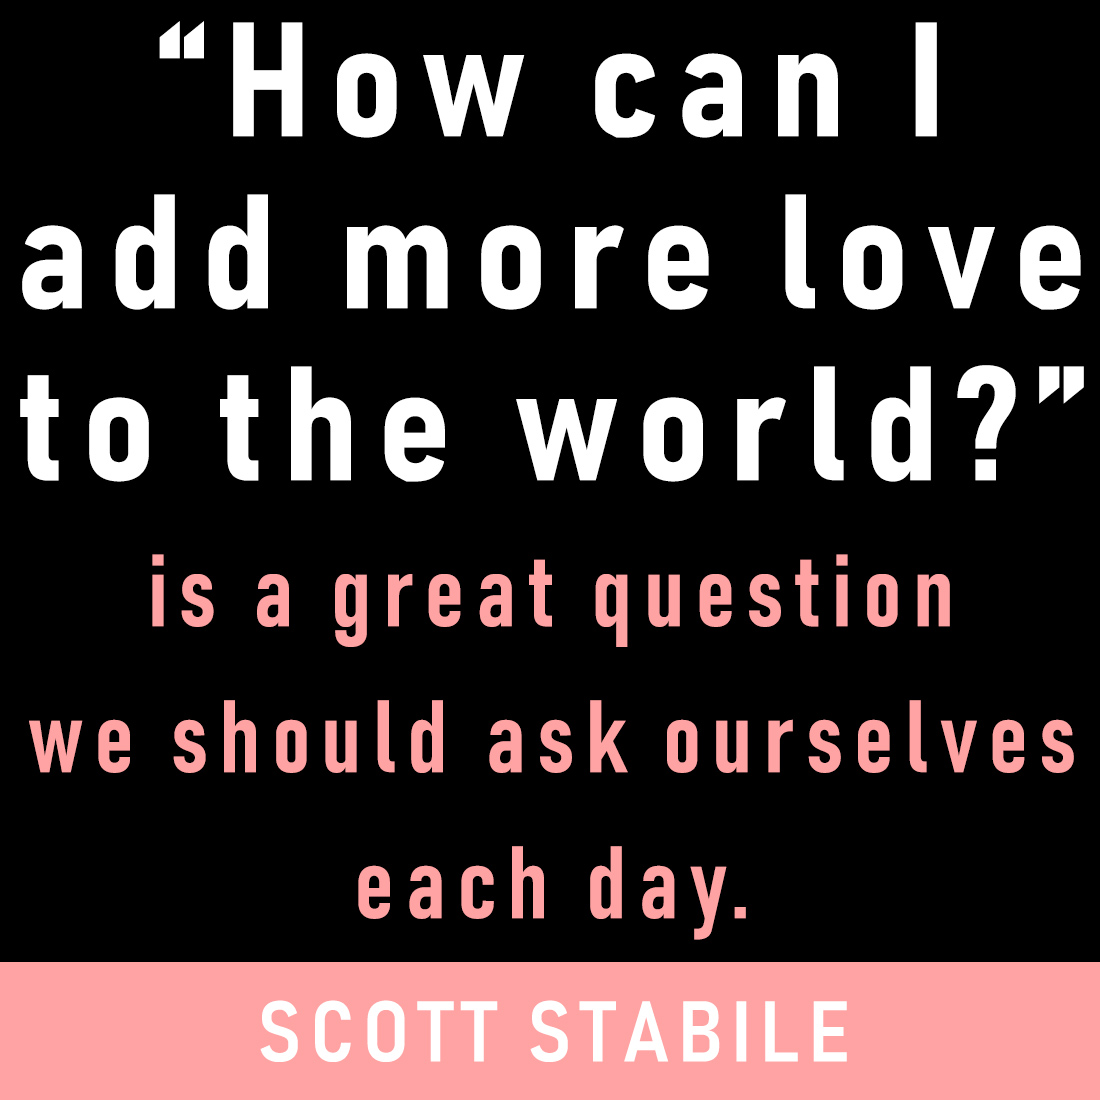 How can I add more love to the world?